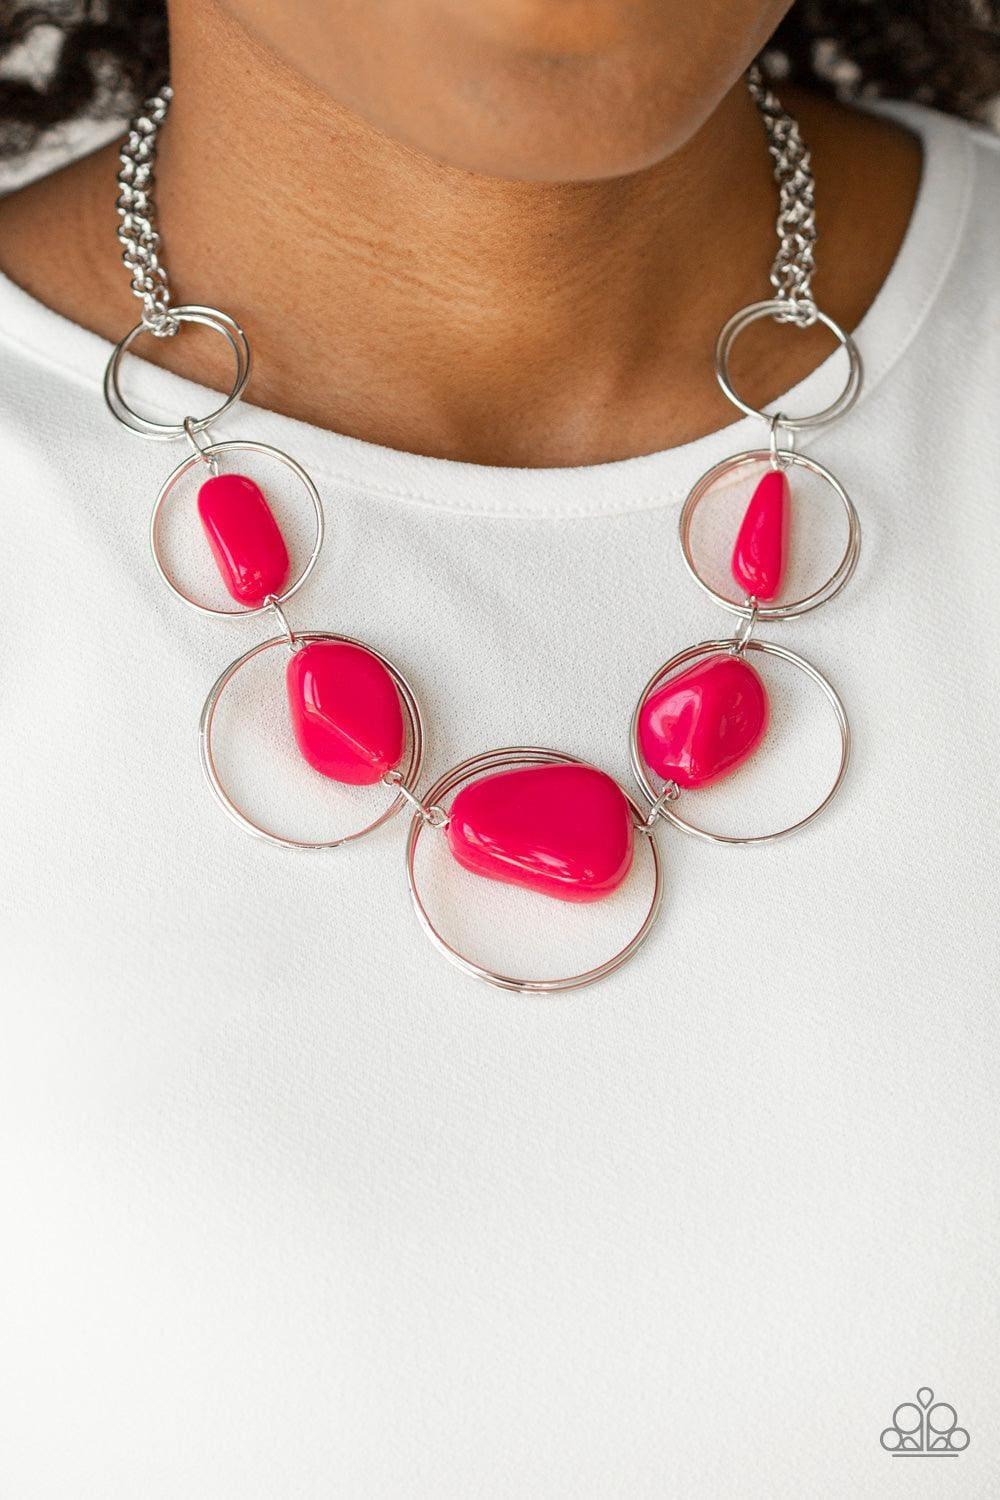 Paparazzi Accessories - Travel Log - Pink Necklace - Bling by JessieK